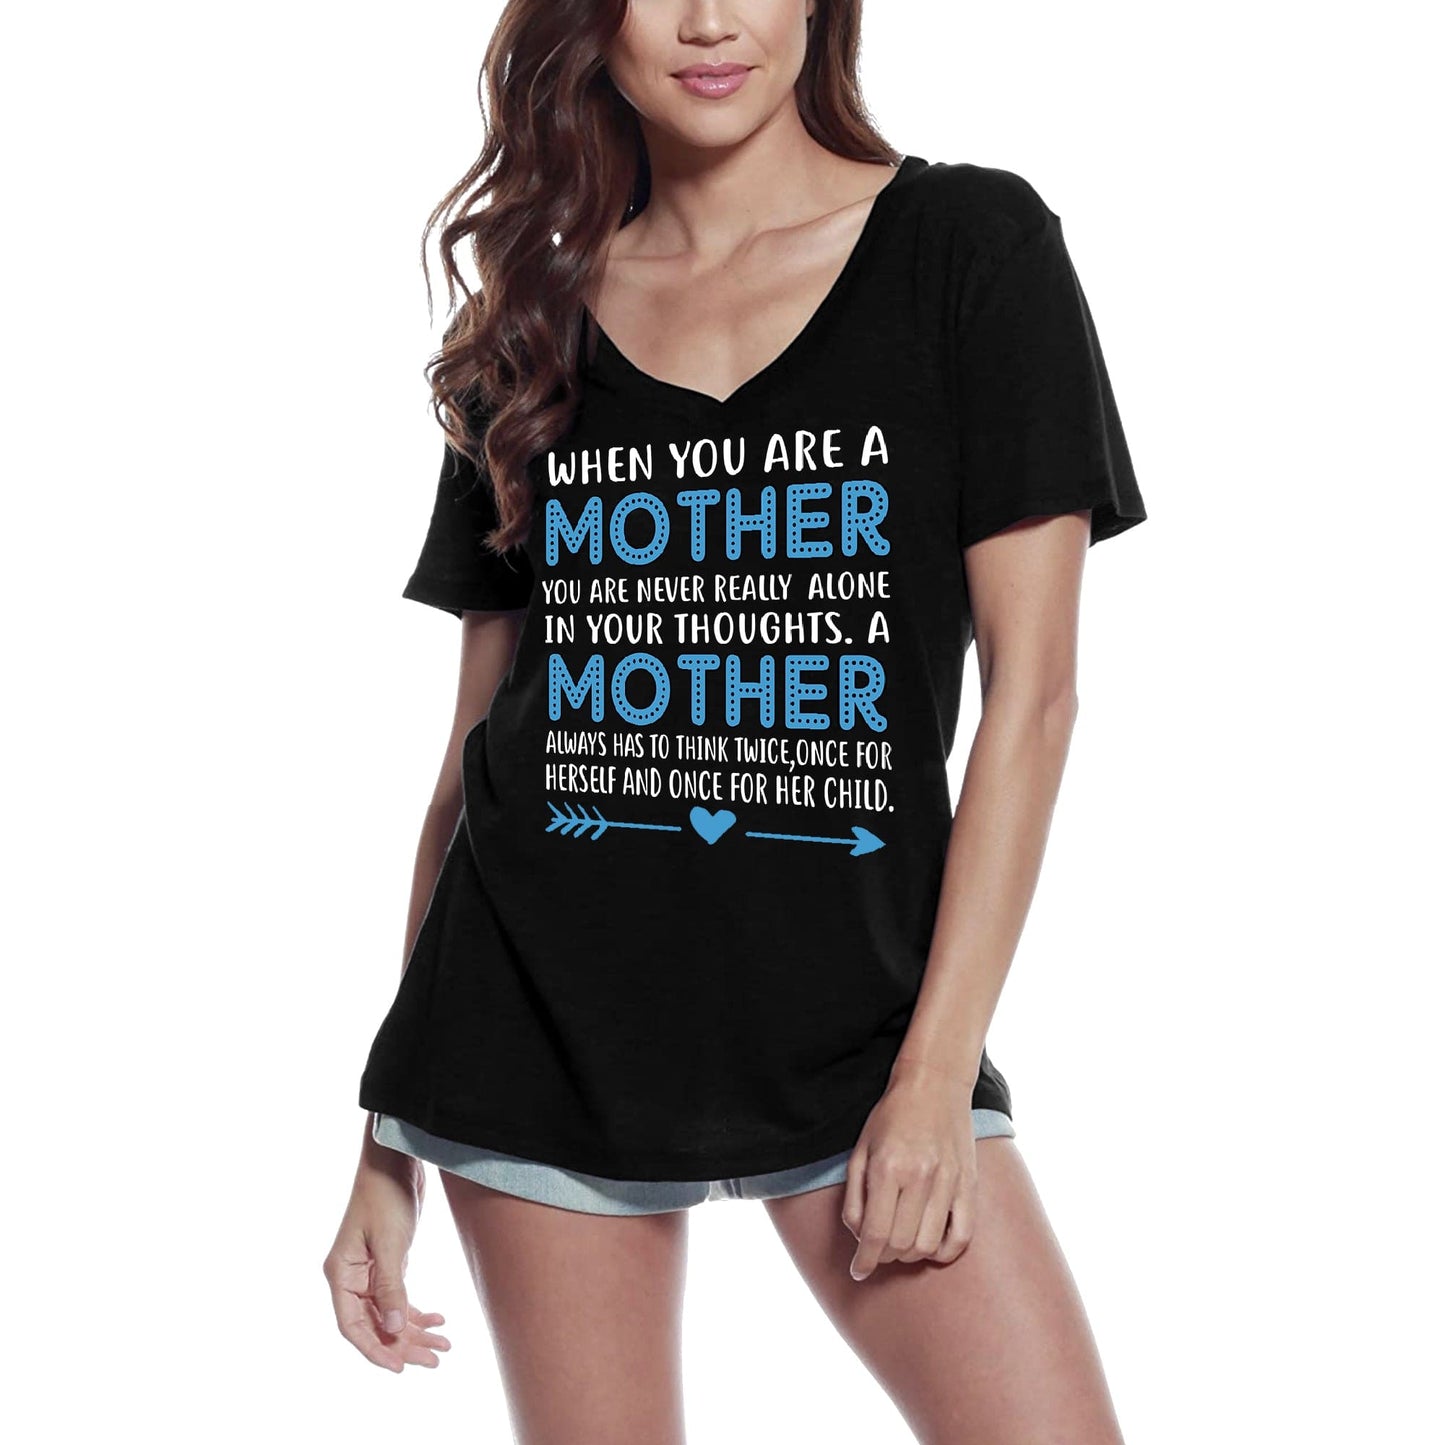 ULTRABASIC Women's T-Shirt When You Are a Mother You are Never Alone - Tee Shirt for Moms